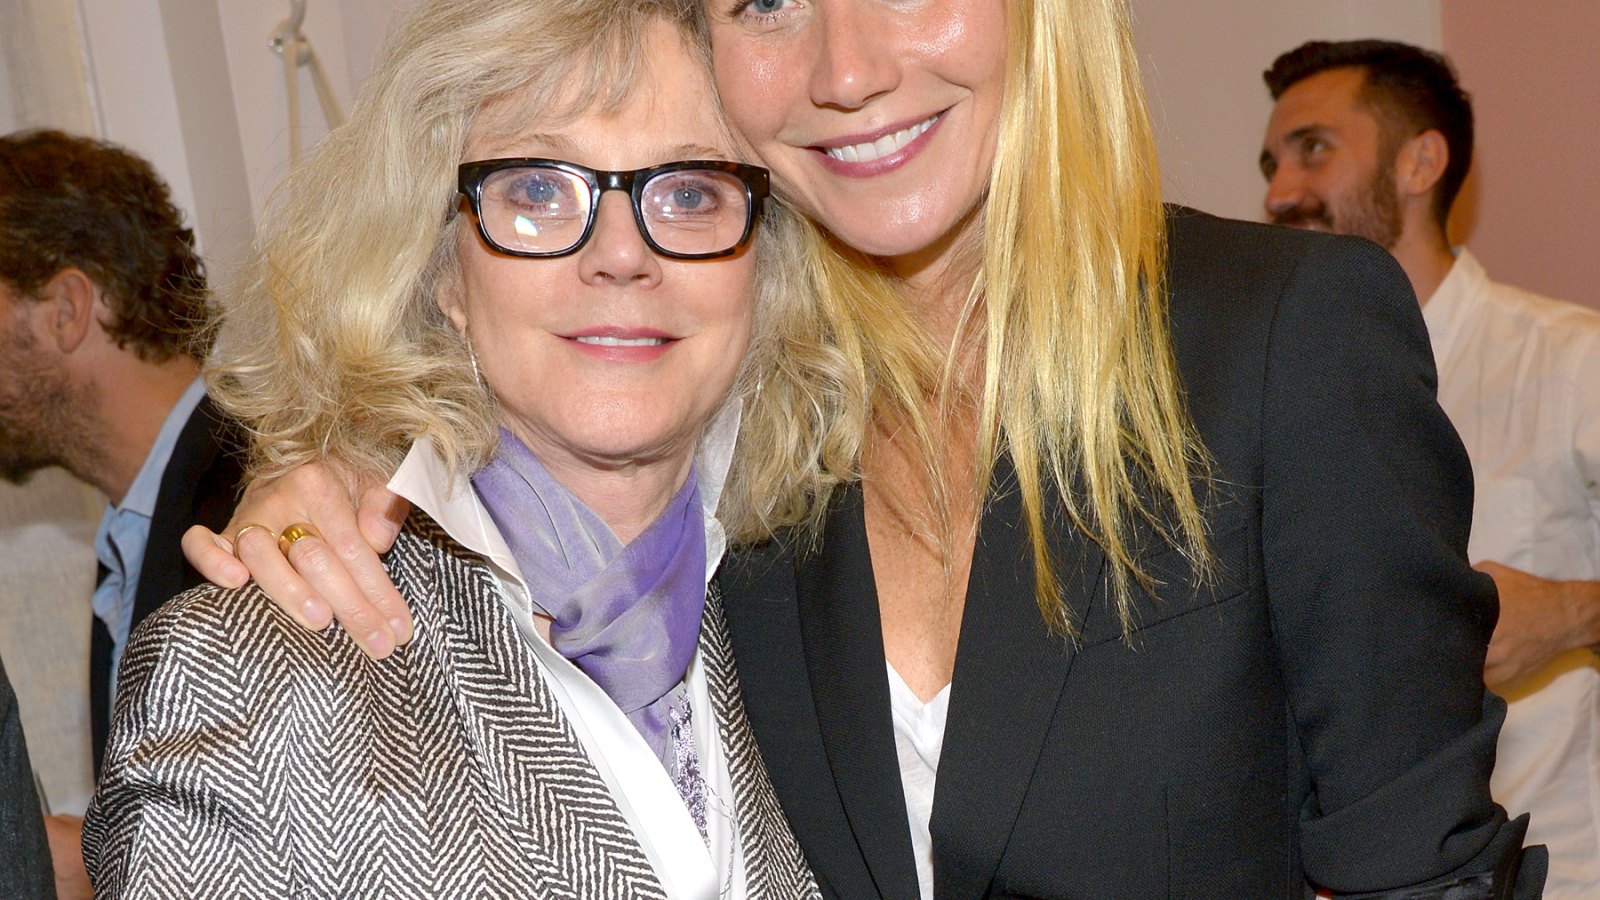 Blythe Danner and Gwyneth Paltrow at Goop Pop-Up party on May 6, 2014